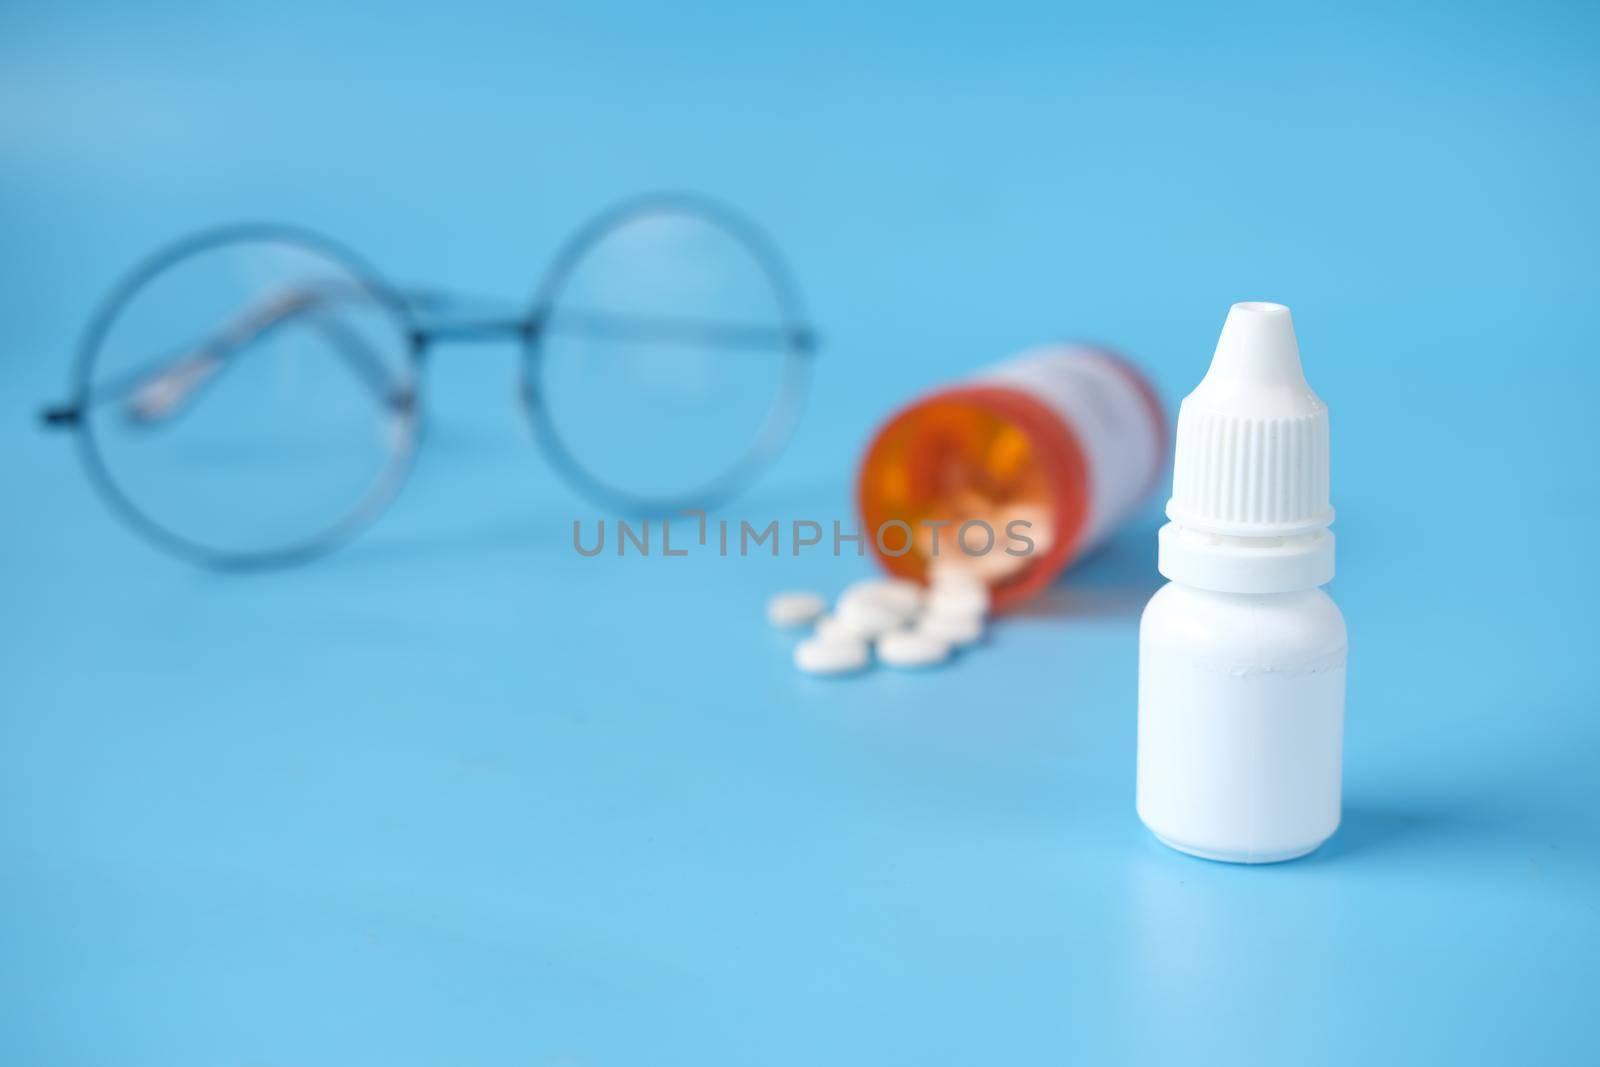 close up of eye drop bottle and eyeglass on white